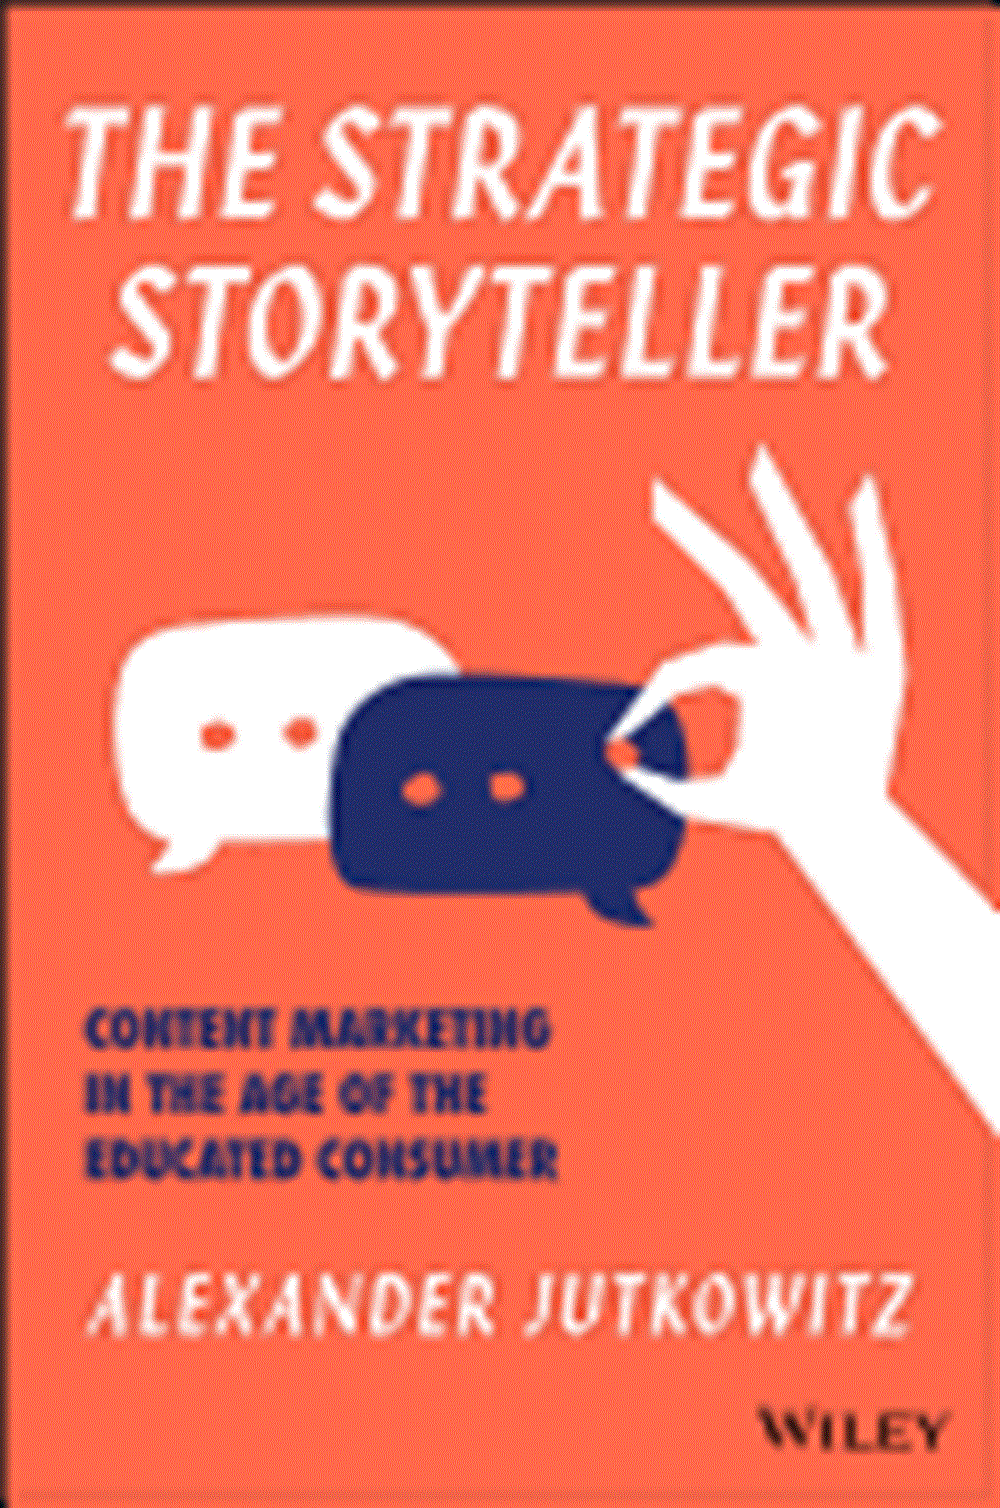 Strategic Storyteller Content Marketing in the Age of the Educated Consumer